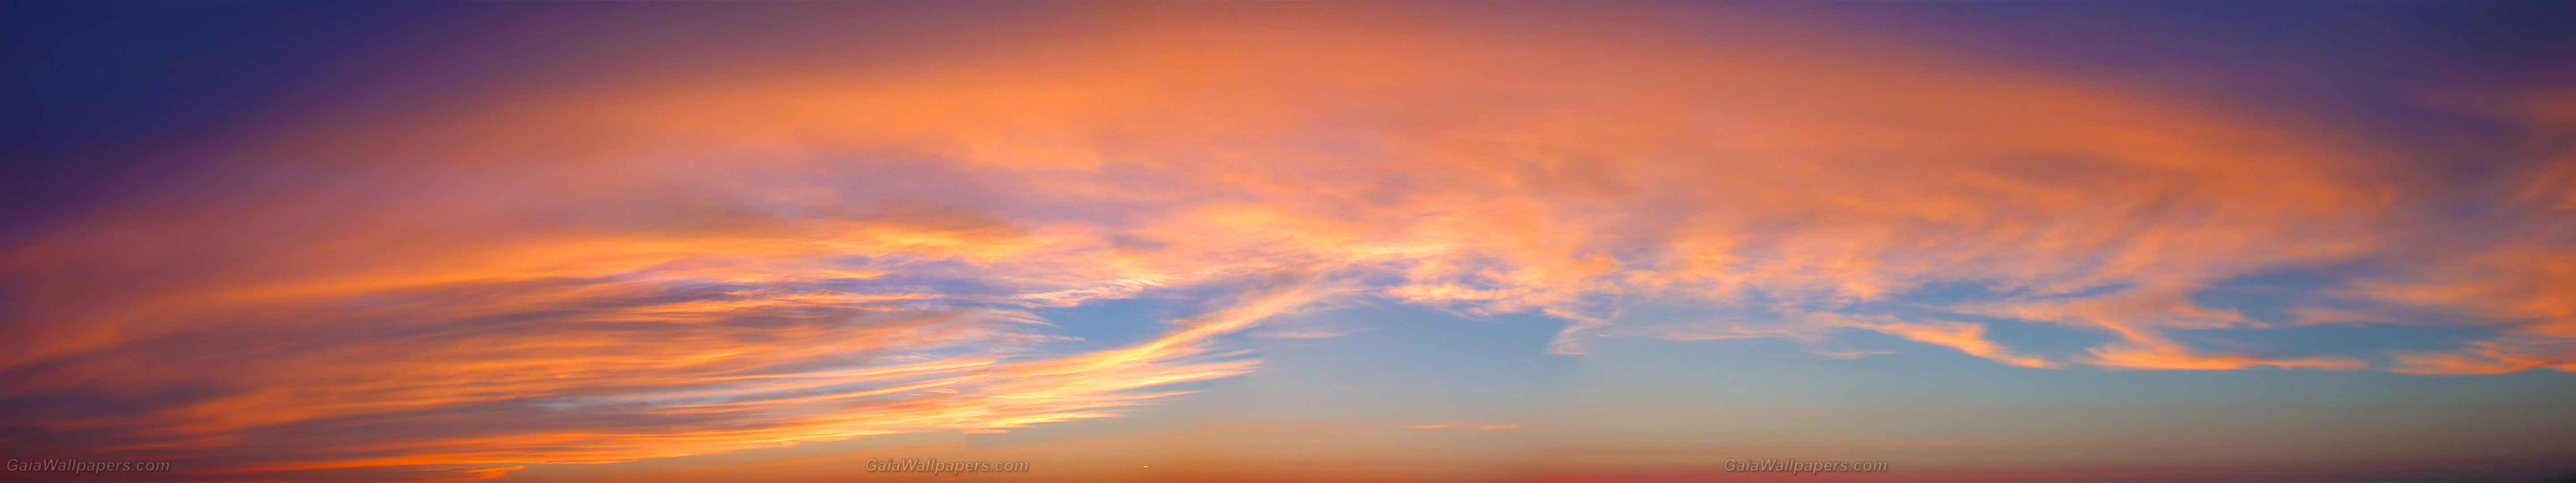 Sunset fading late in the clouds - Free desktop wallpapers